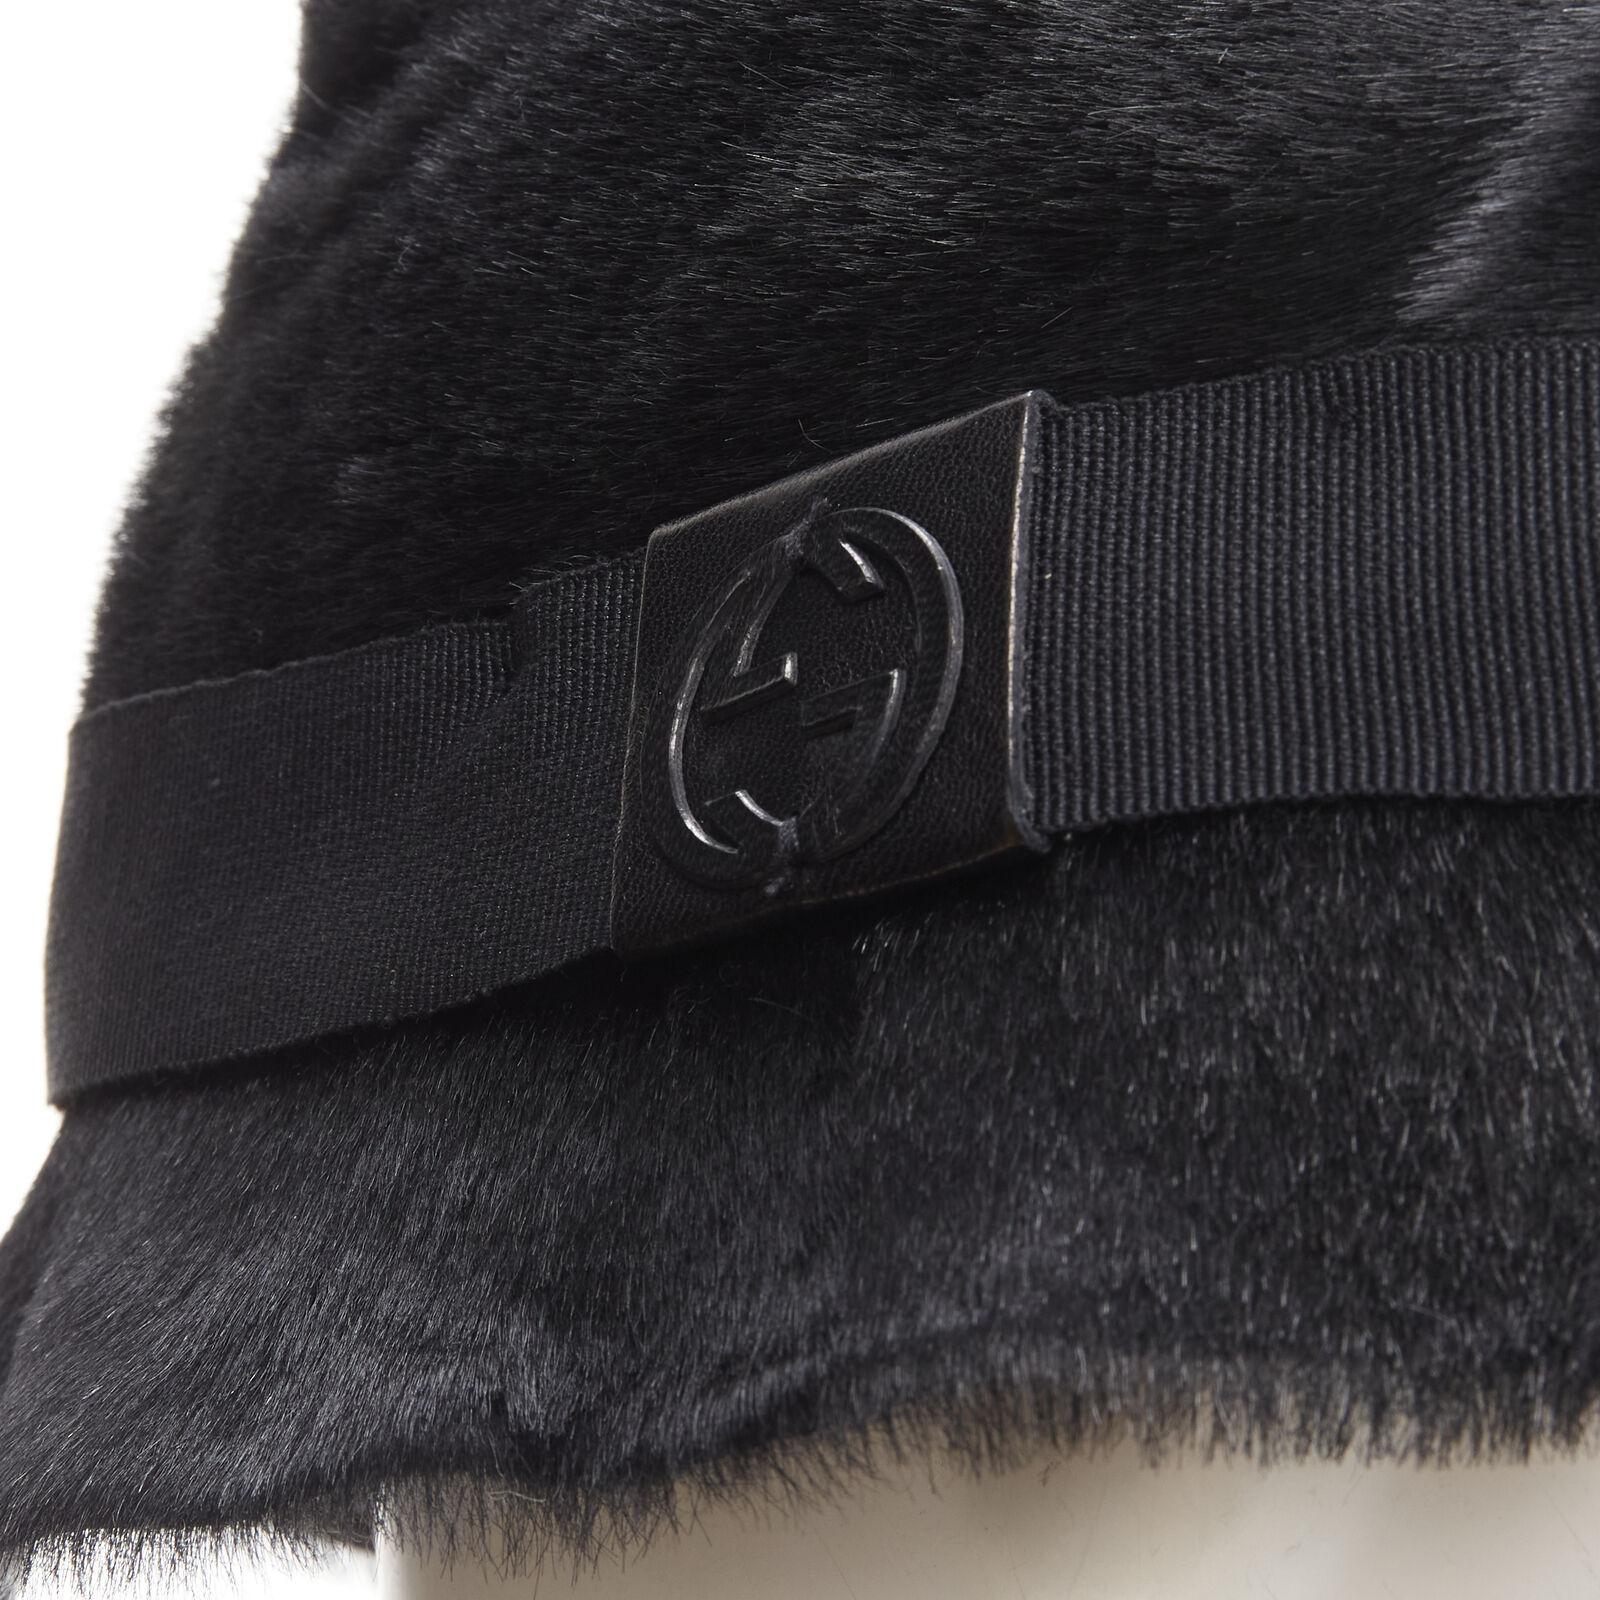 GUCCI Vintage black calf hair leather GG logo grosgrain ribbon bucket hat M
Reference: ANWU/A00870
Brand: Gucci
Designer: Tom Ford
Material: Leather
Color: Black
Pattern: Solid
Lining: Fabric
Extra Details: Genuine fur upper. Black grosgrain ribbon